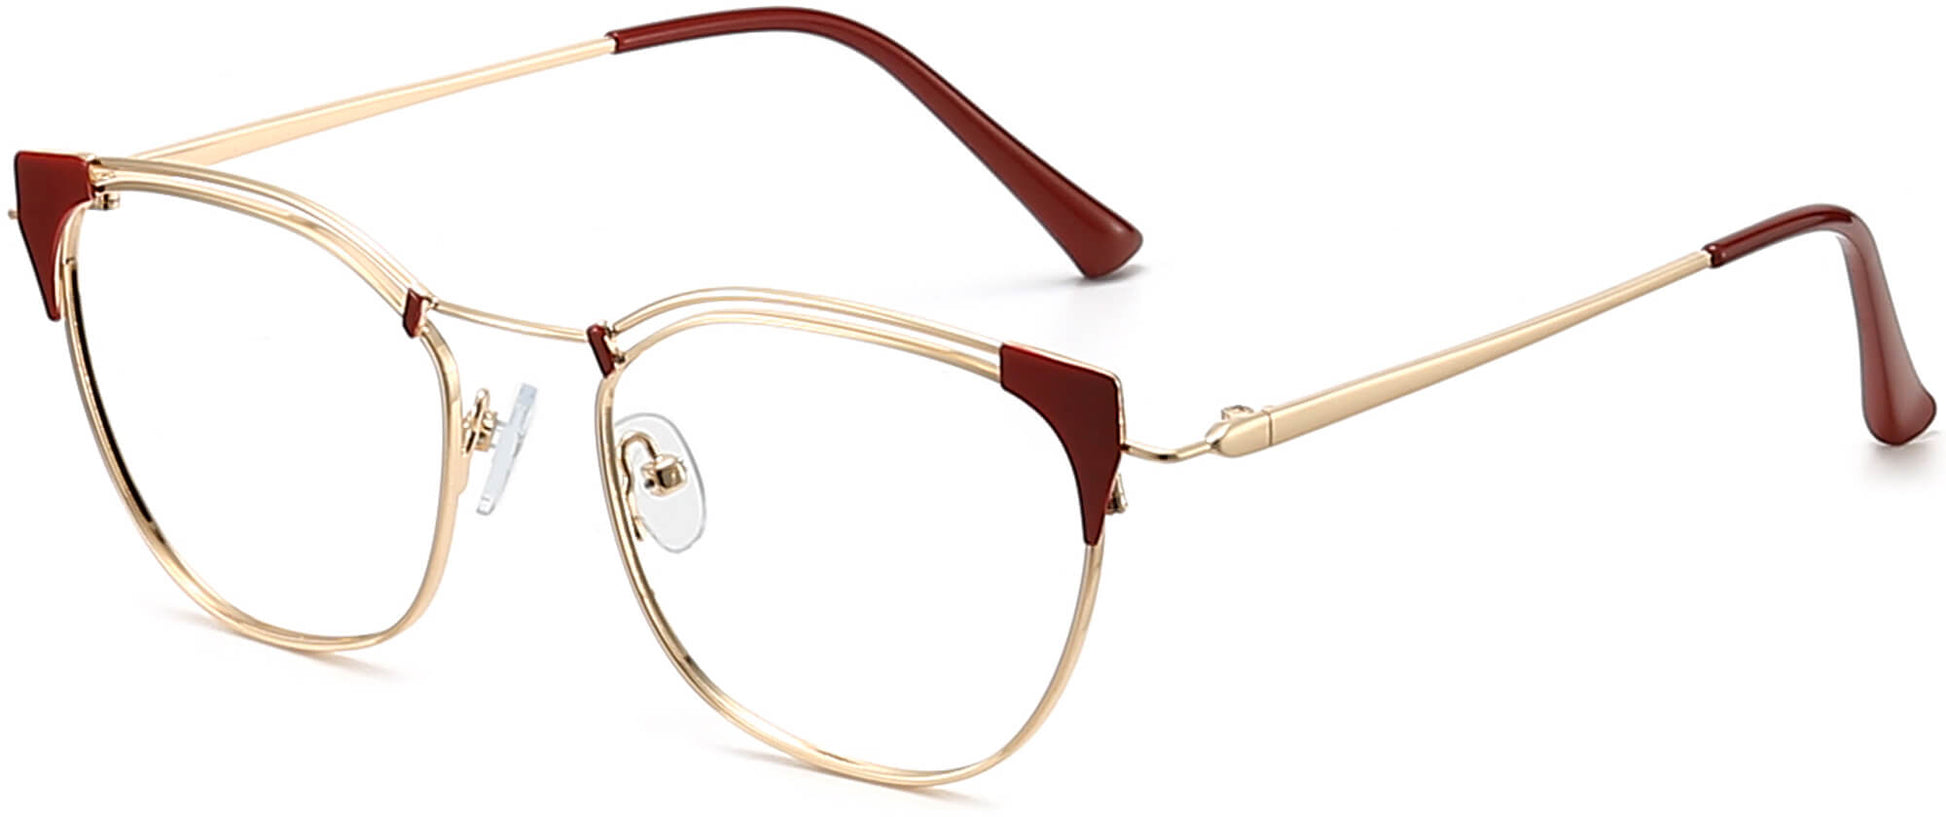 Meadow Cateye Red Eyeglasses from ANRRI, angle view